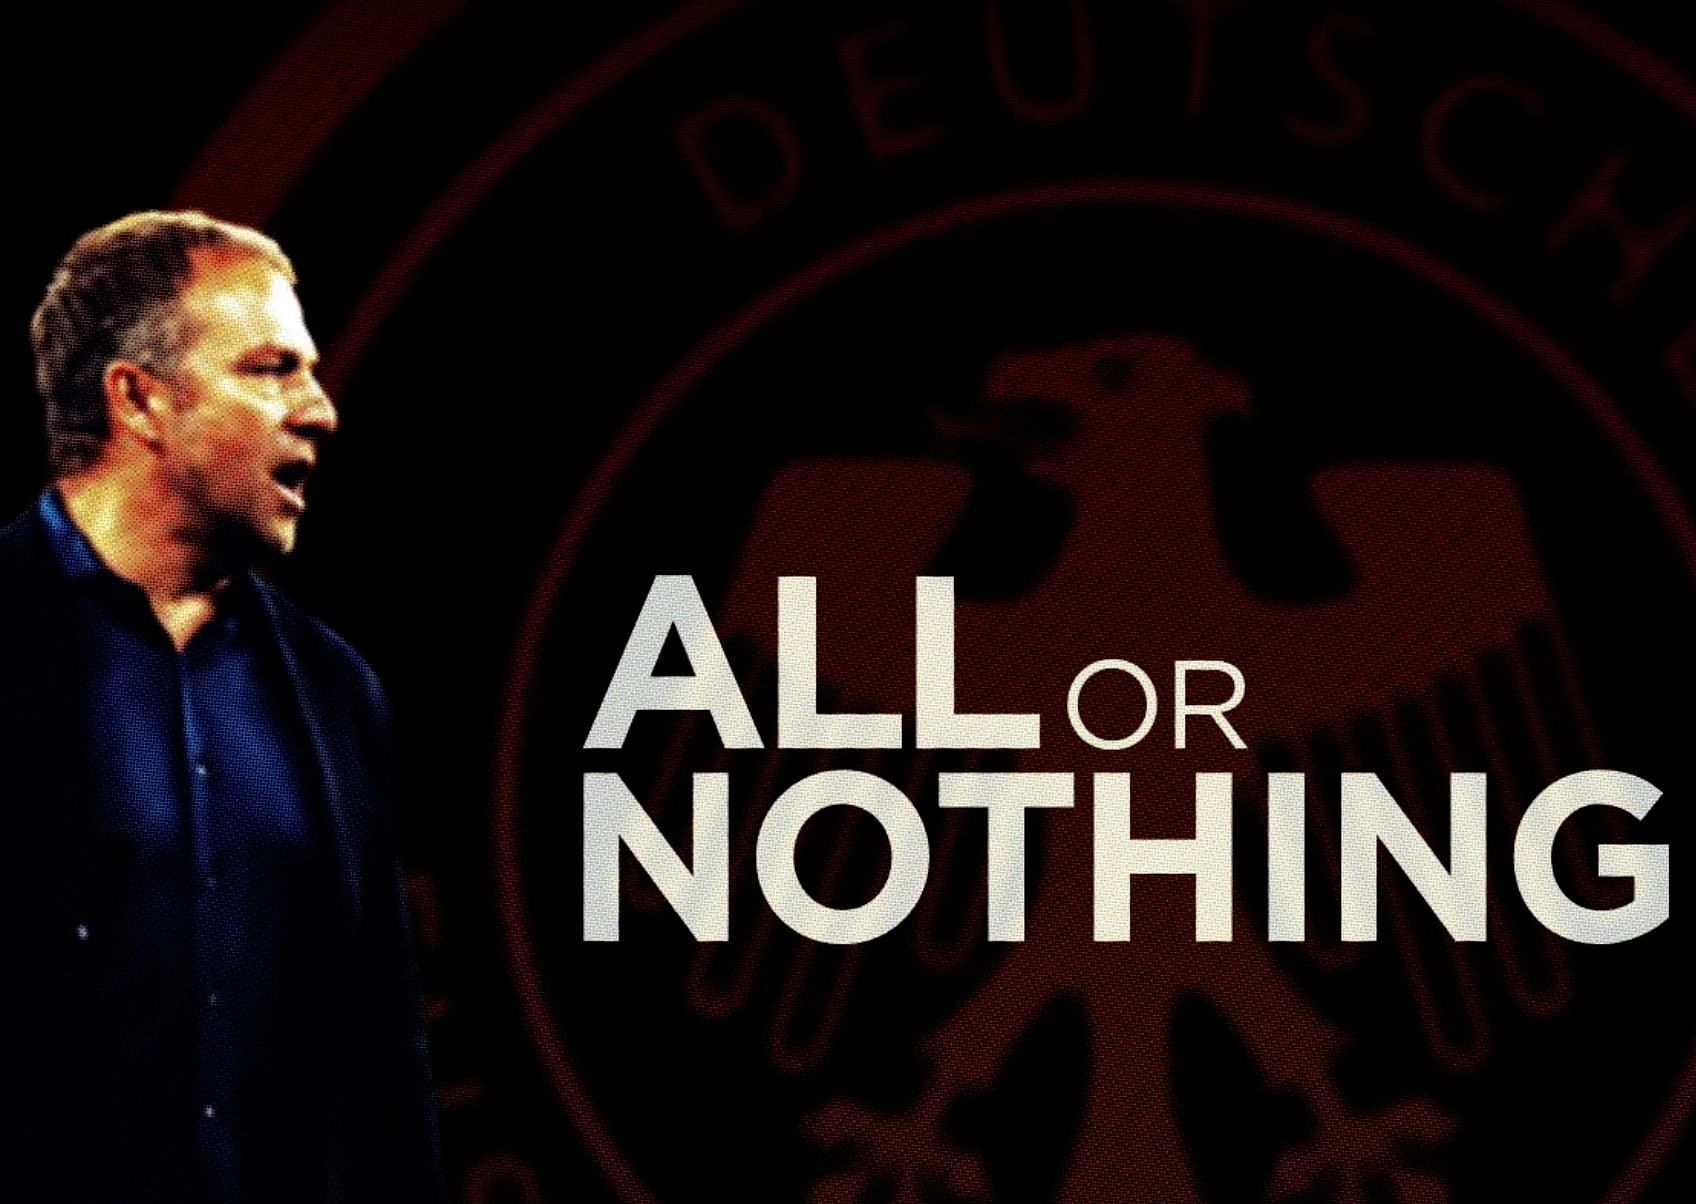 All or Nothing Poster. Image via IMDB.